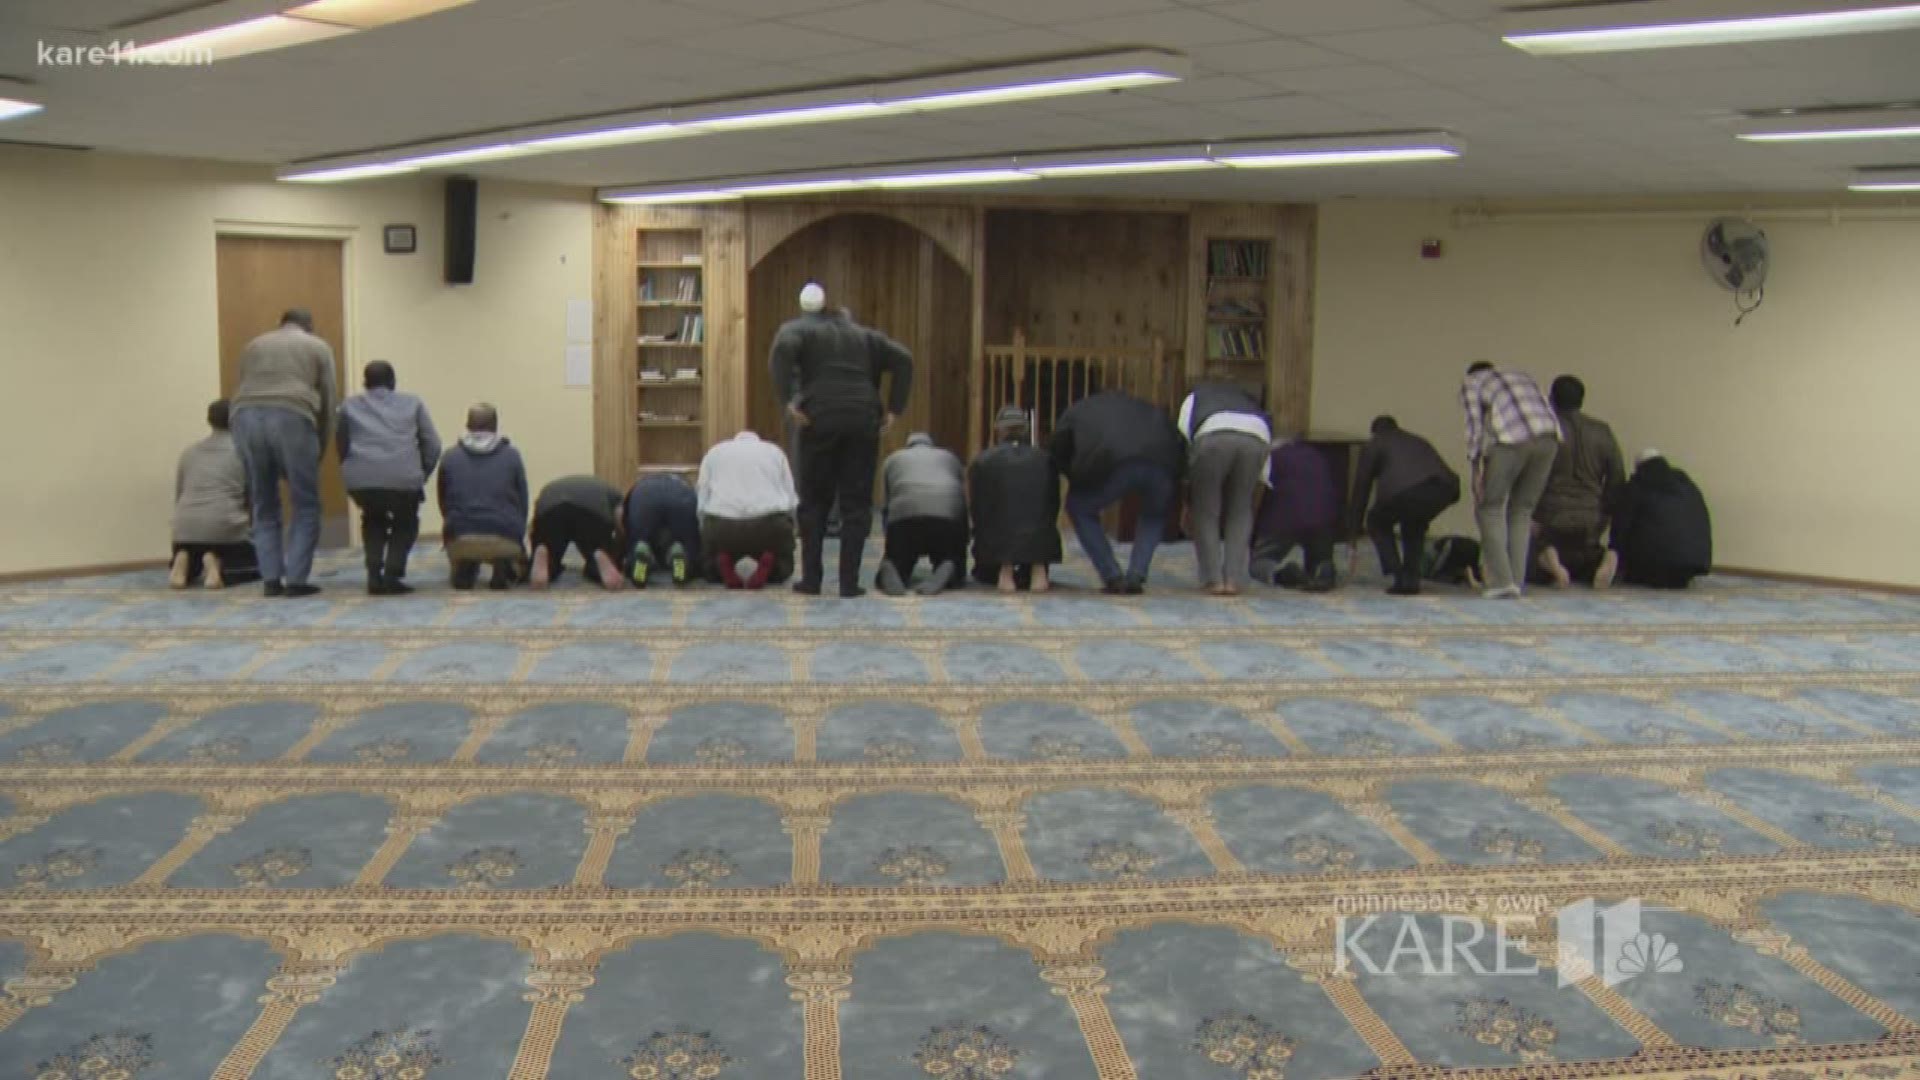 Two and a half months ago a coward set off a bomb at a mosque in Bloomington where people were gathered to pray. Six days ago, at that same mosque, a robbery happened. No arrests have been made in either case. http://kare11.tv/2zR6Q1V